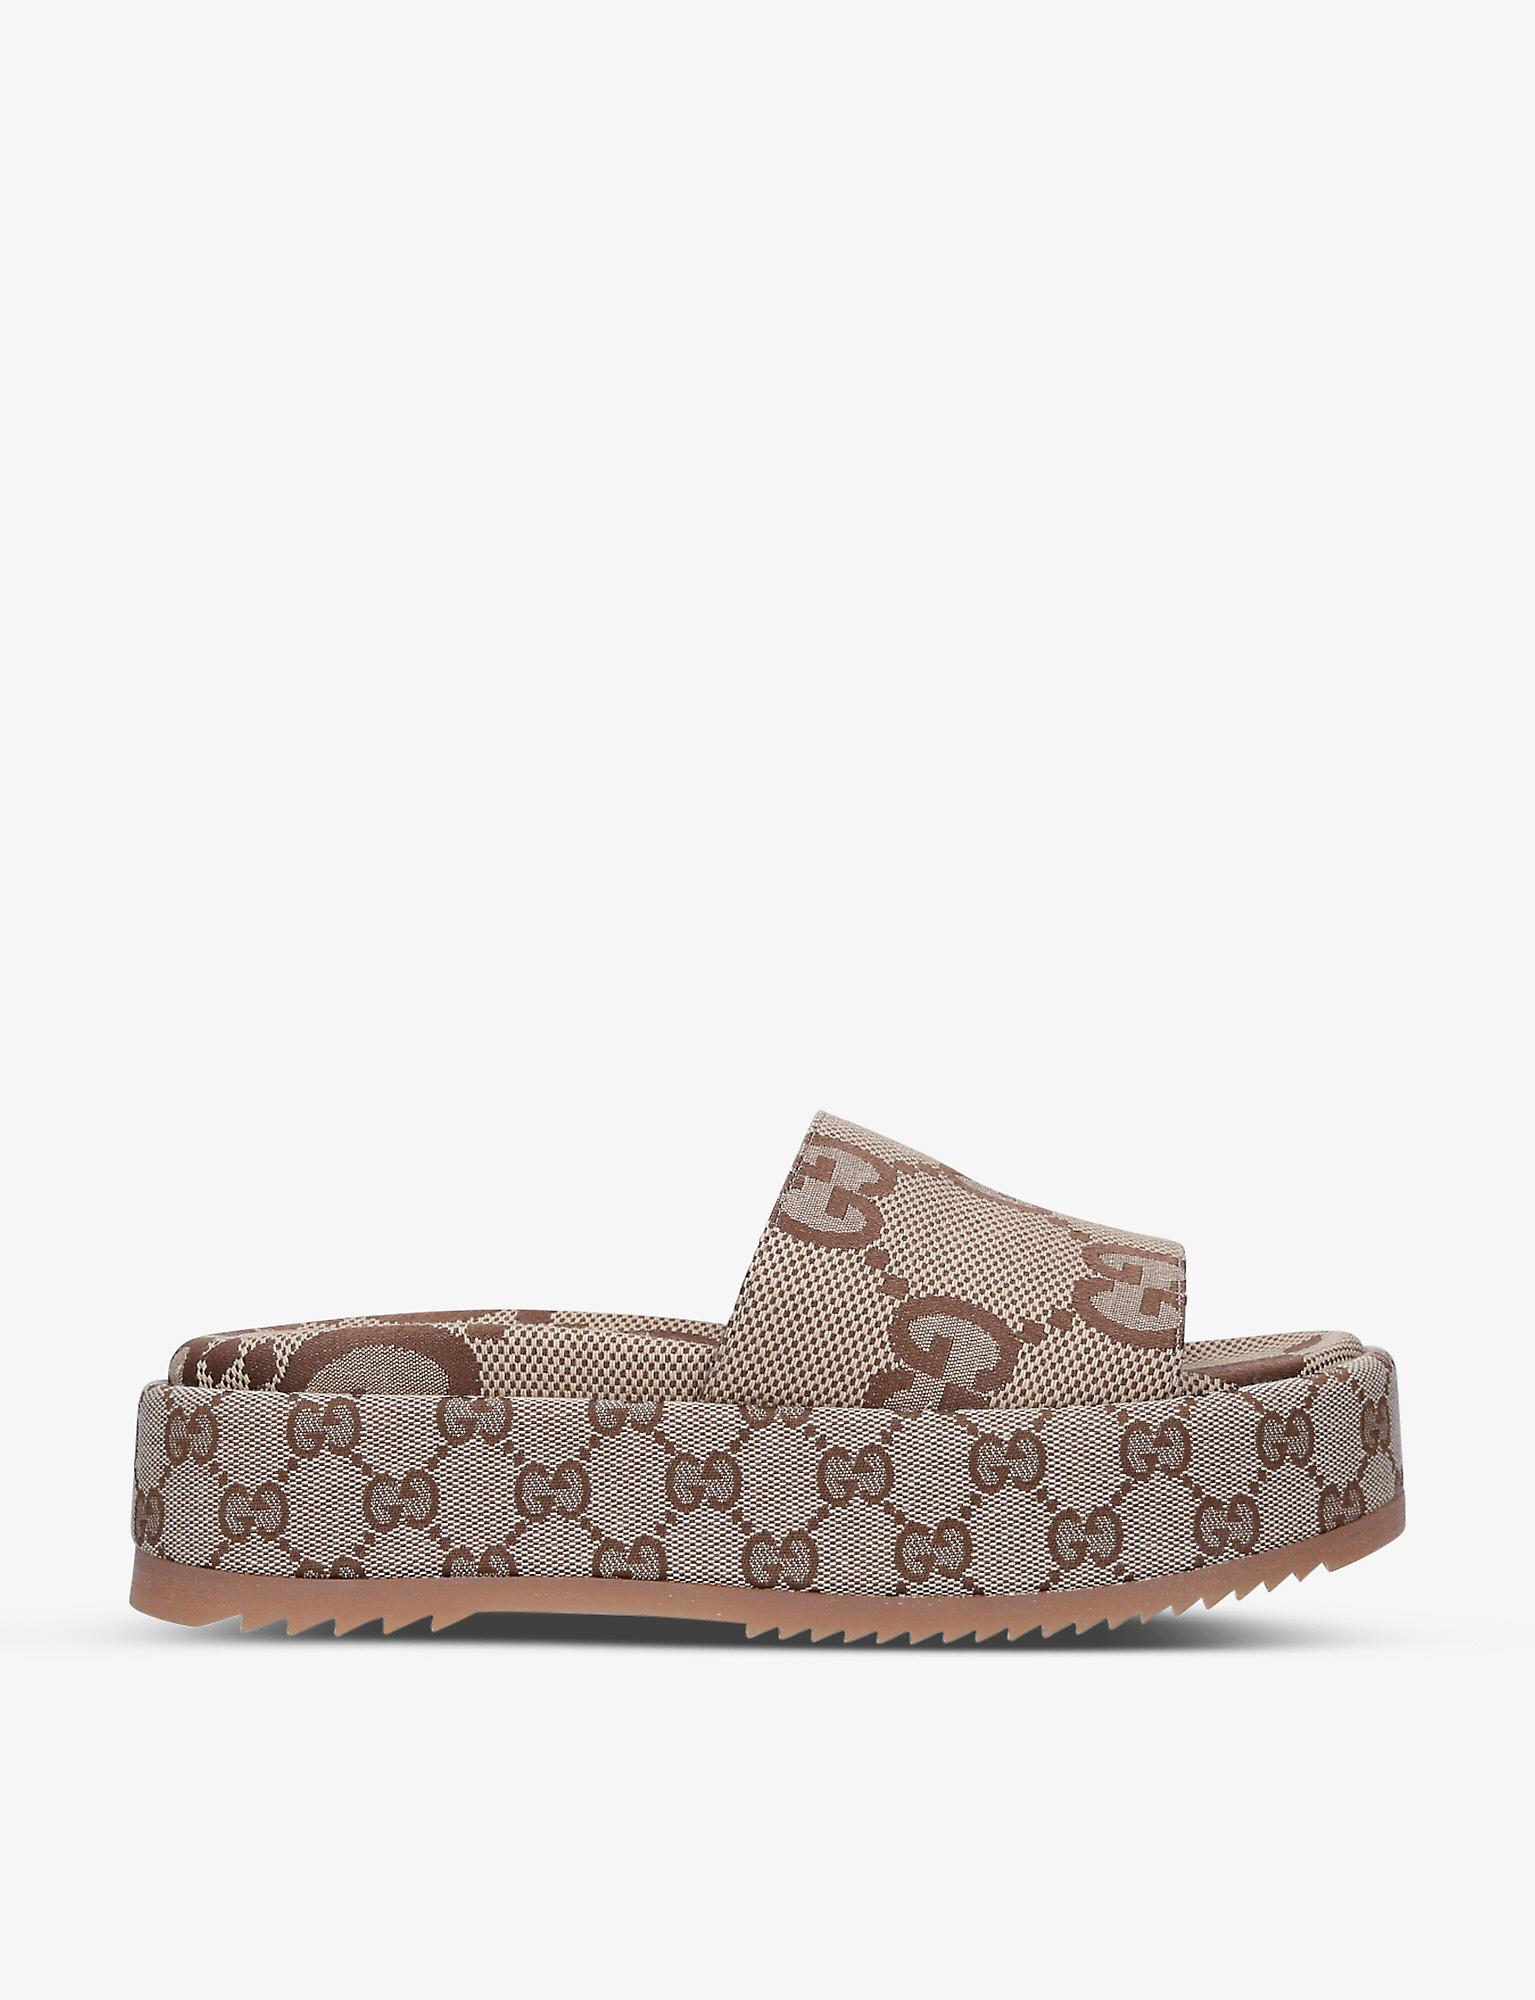 Gucci Angelina GG-print Canvas Slides in Camel (Natural) | Lyst Canada